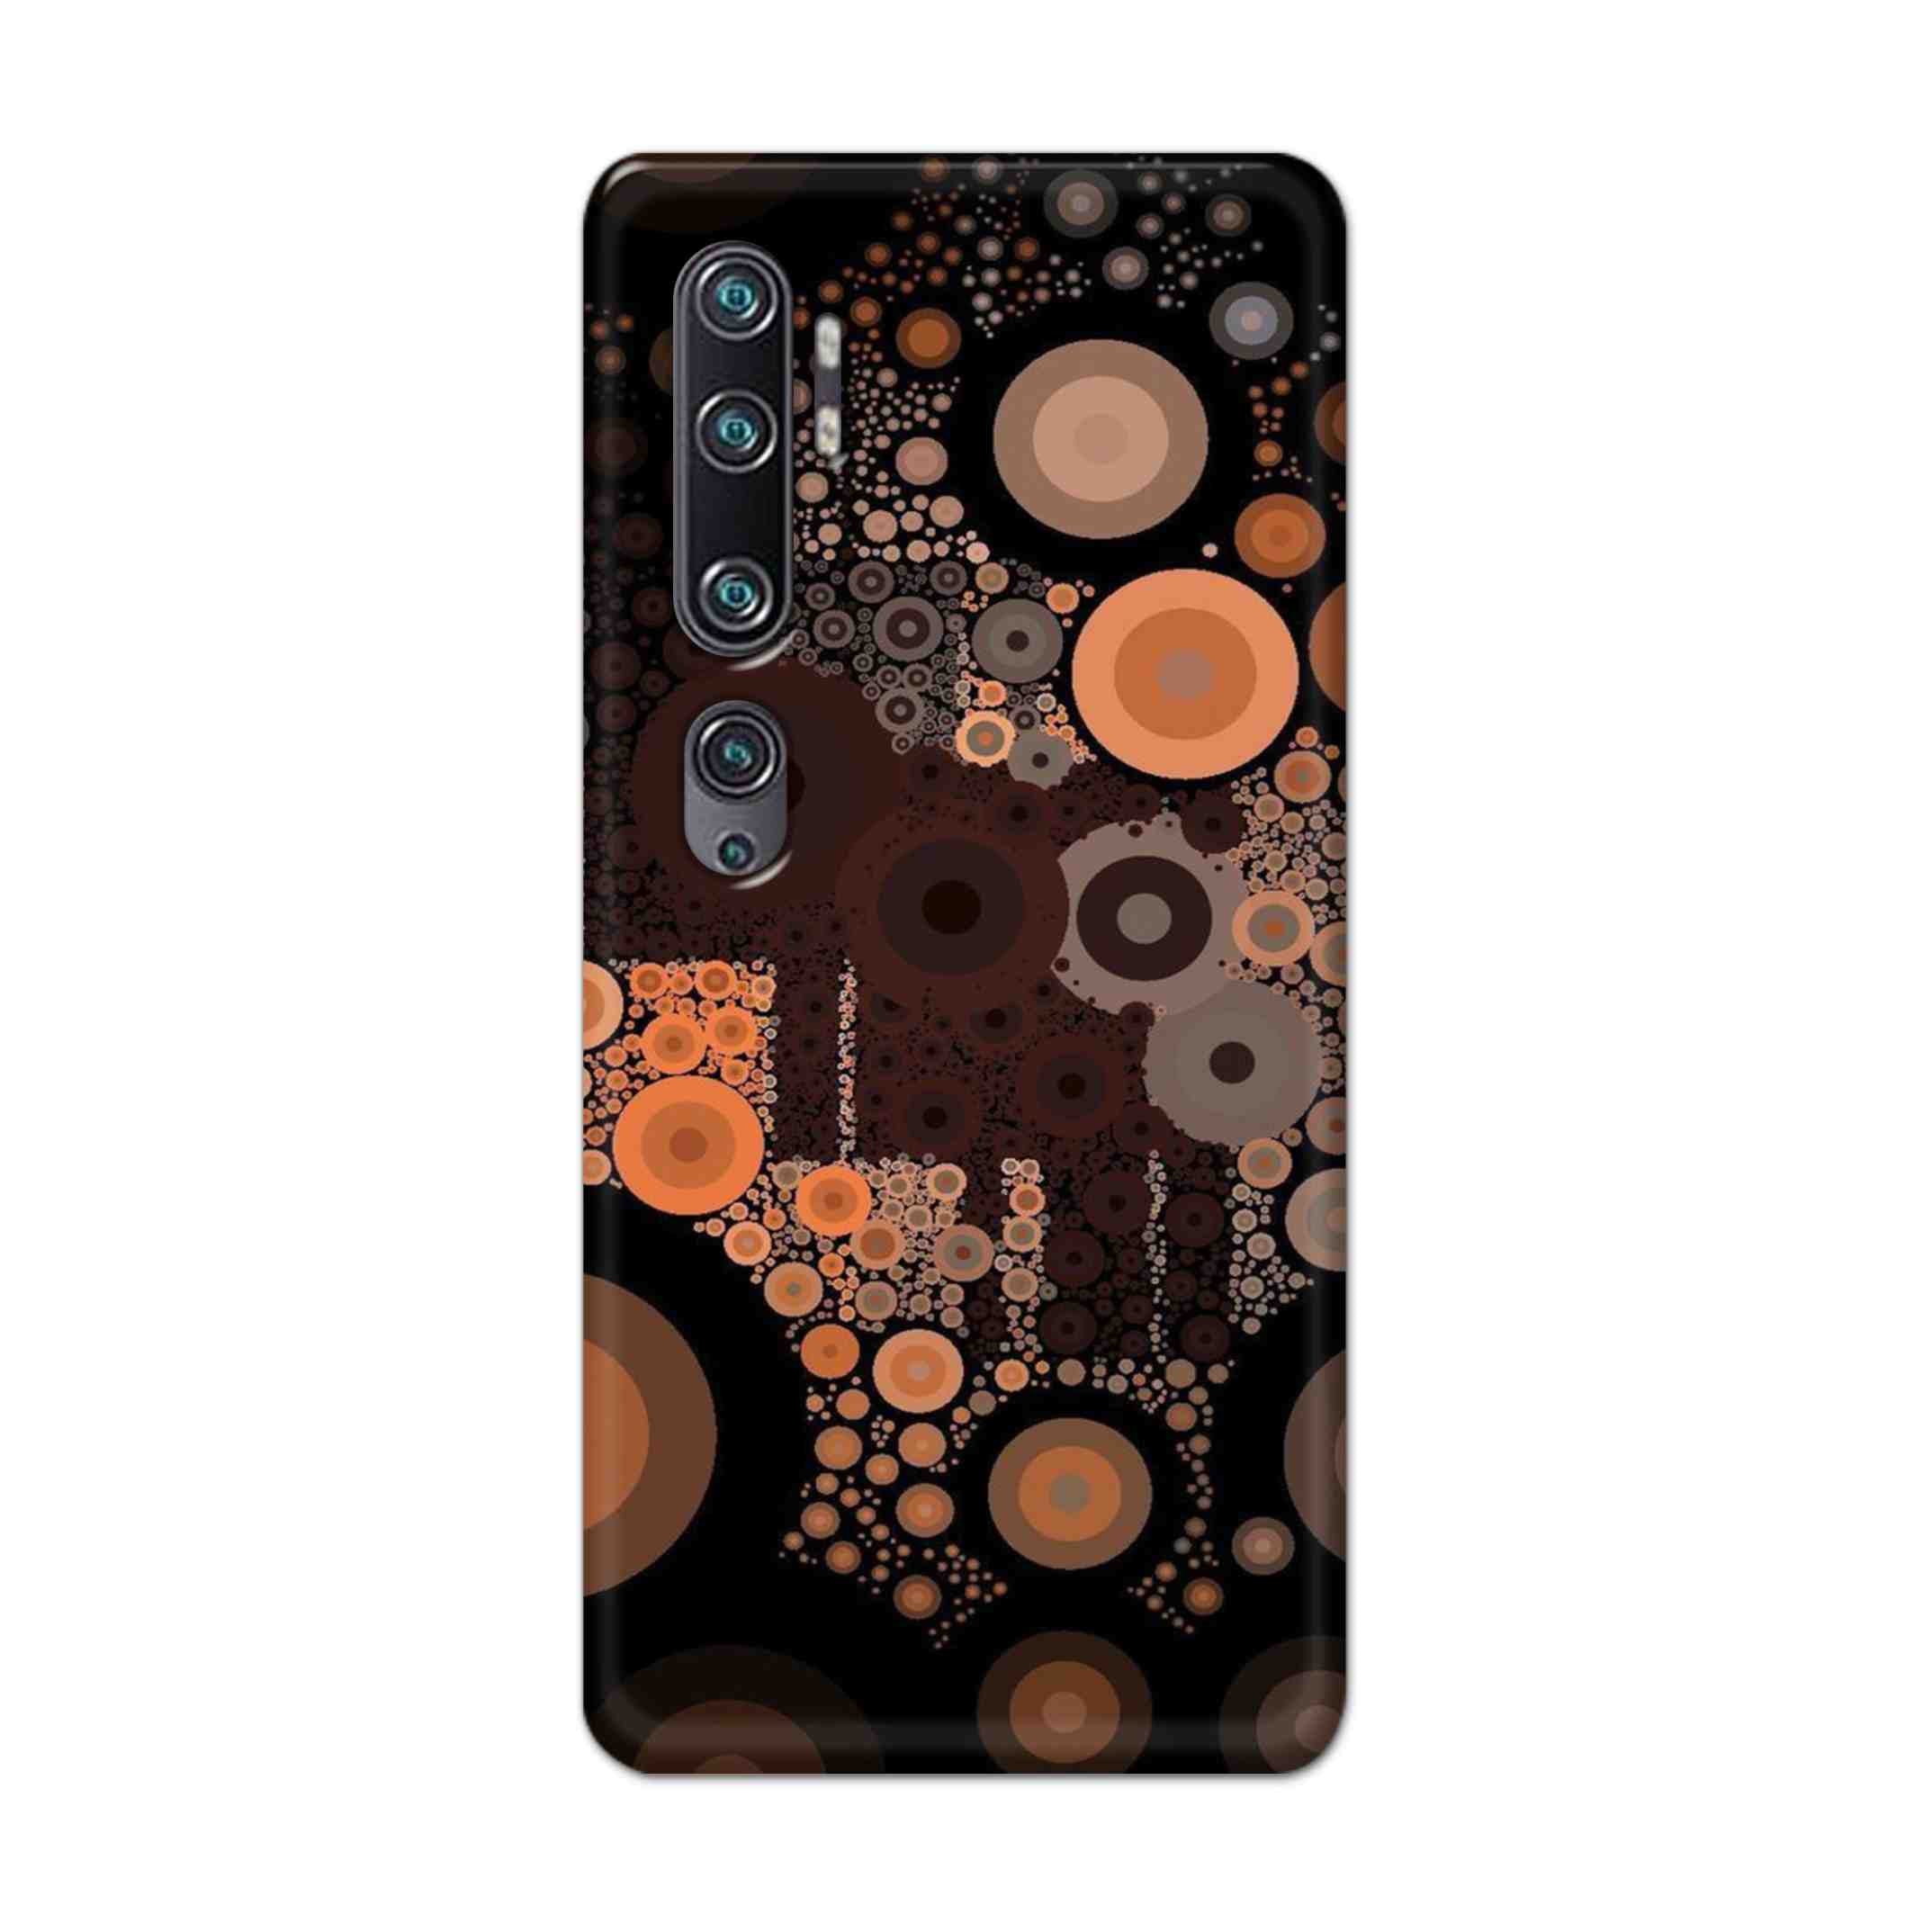 Buy Golden Circle Hard Back Mobile Phone Case Cover For Xiaomi Mi Note 10 Online